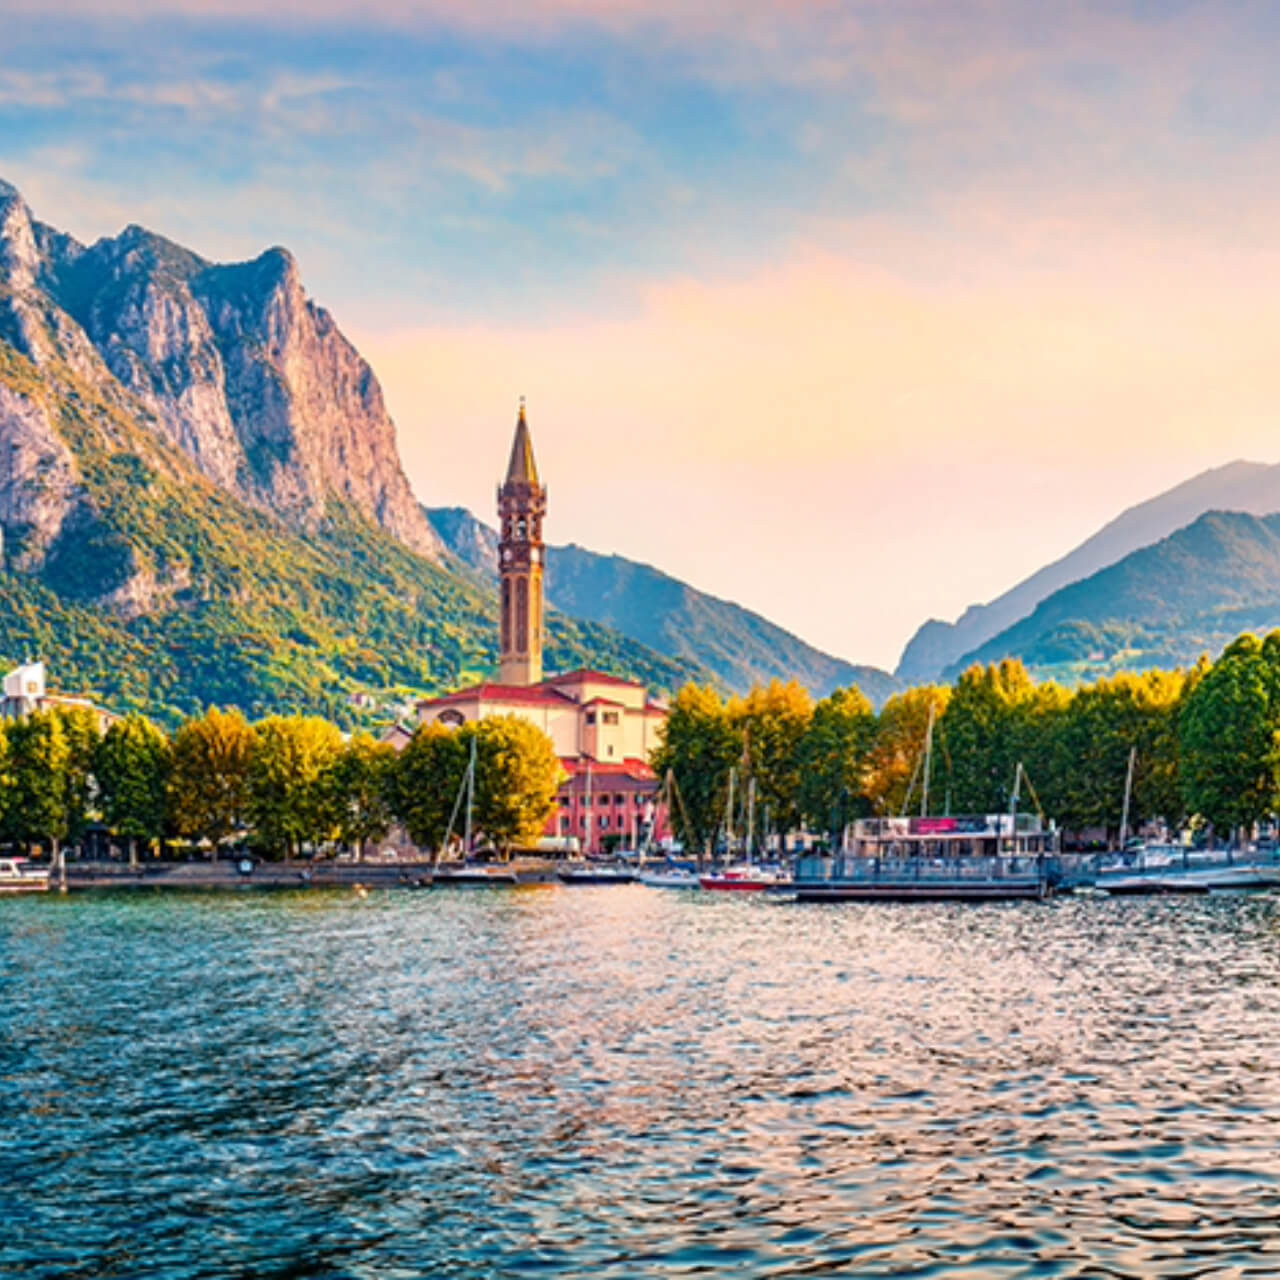 Picturesque view of Lake Como with a church spire rising against the backdrop of lush mountains and a serene lakefront lined with boats and trees under a soft dusk sky.